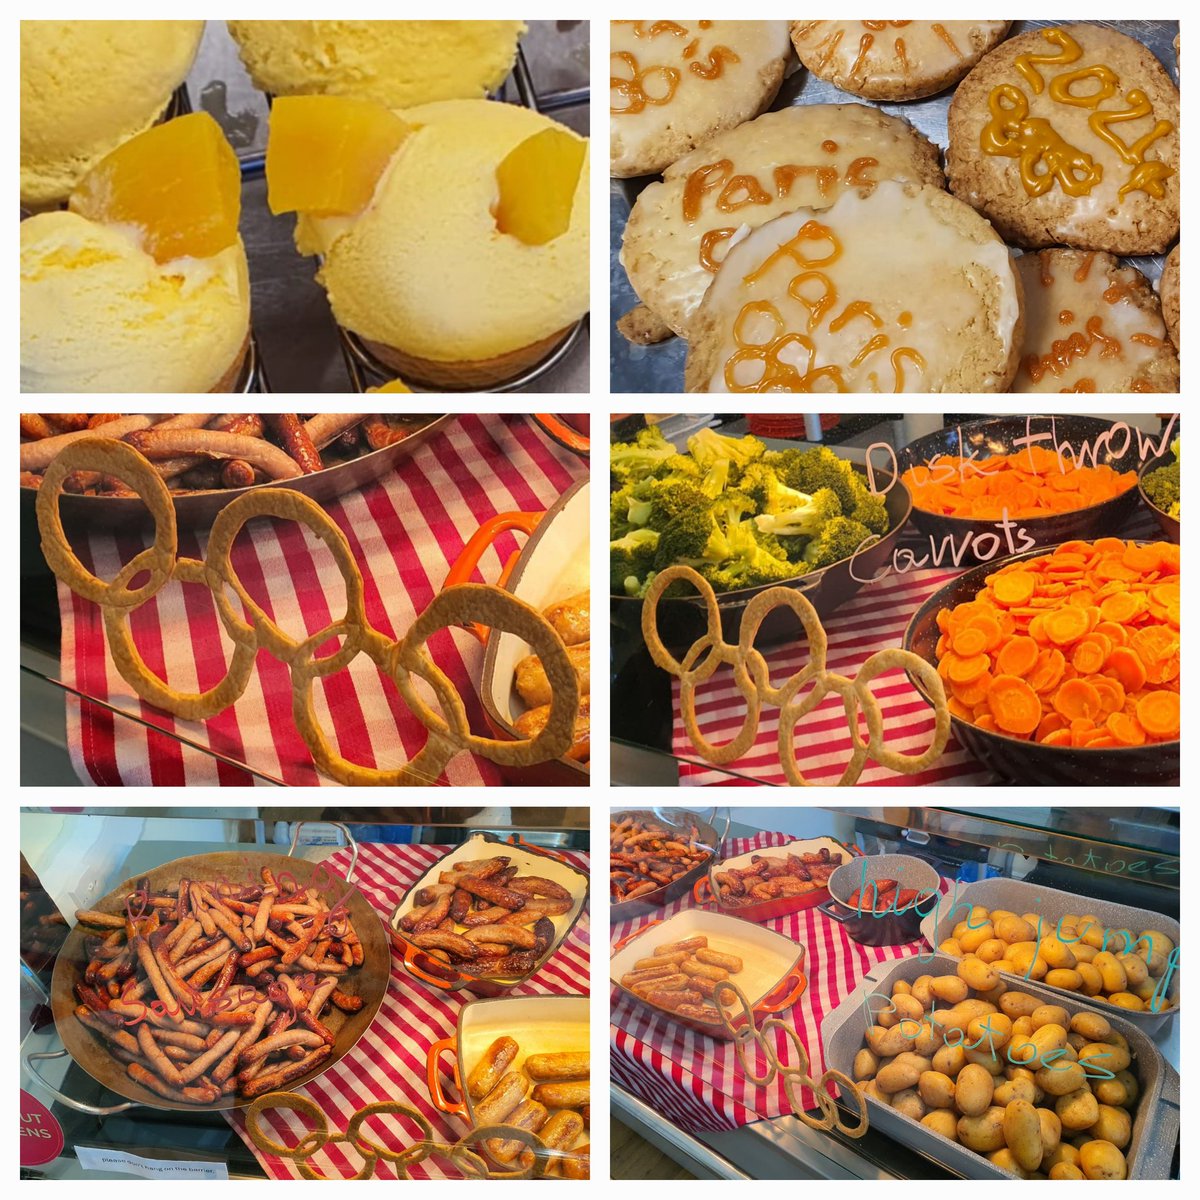 Todays lunch @Greshams_School pre prep a olympic theme lunch included ice cream touches and gold medal cookies @SarahHollyJJJ @Greshamshead @HolroydHowe @HowsonHelen